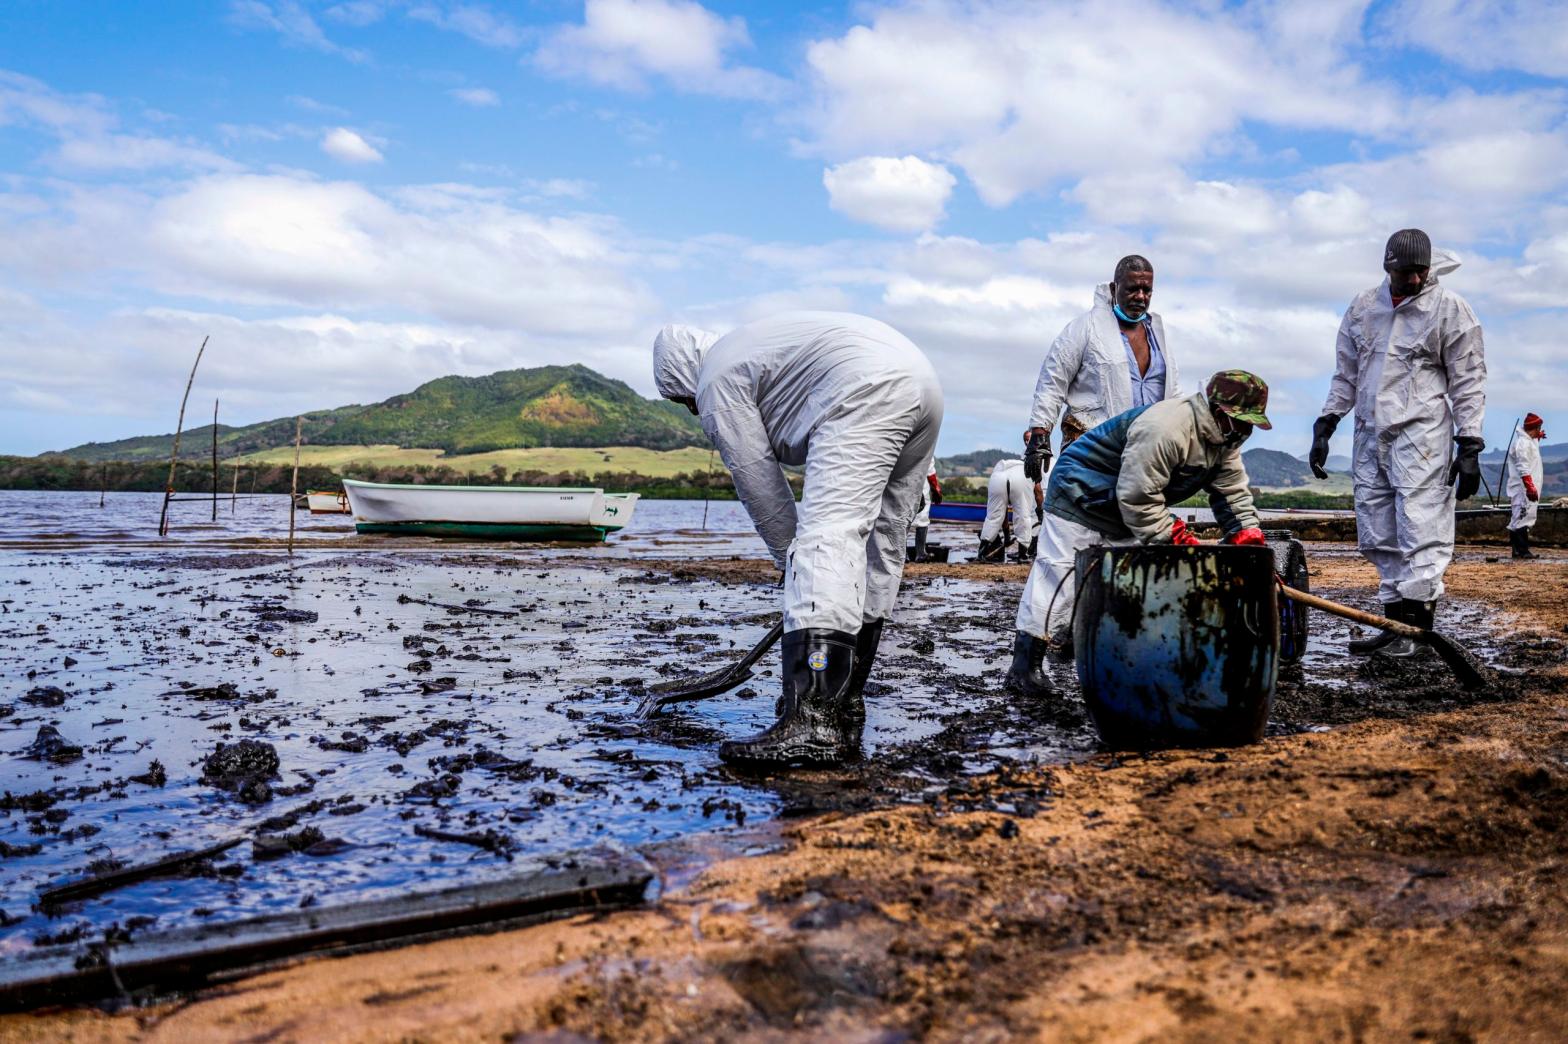 People scoop leaked oil near Blue bay Marine Park in southeast Mauritius on August 9, 2020 (Photo: L’Express Maurice, Getty Images)